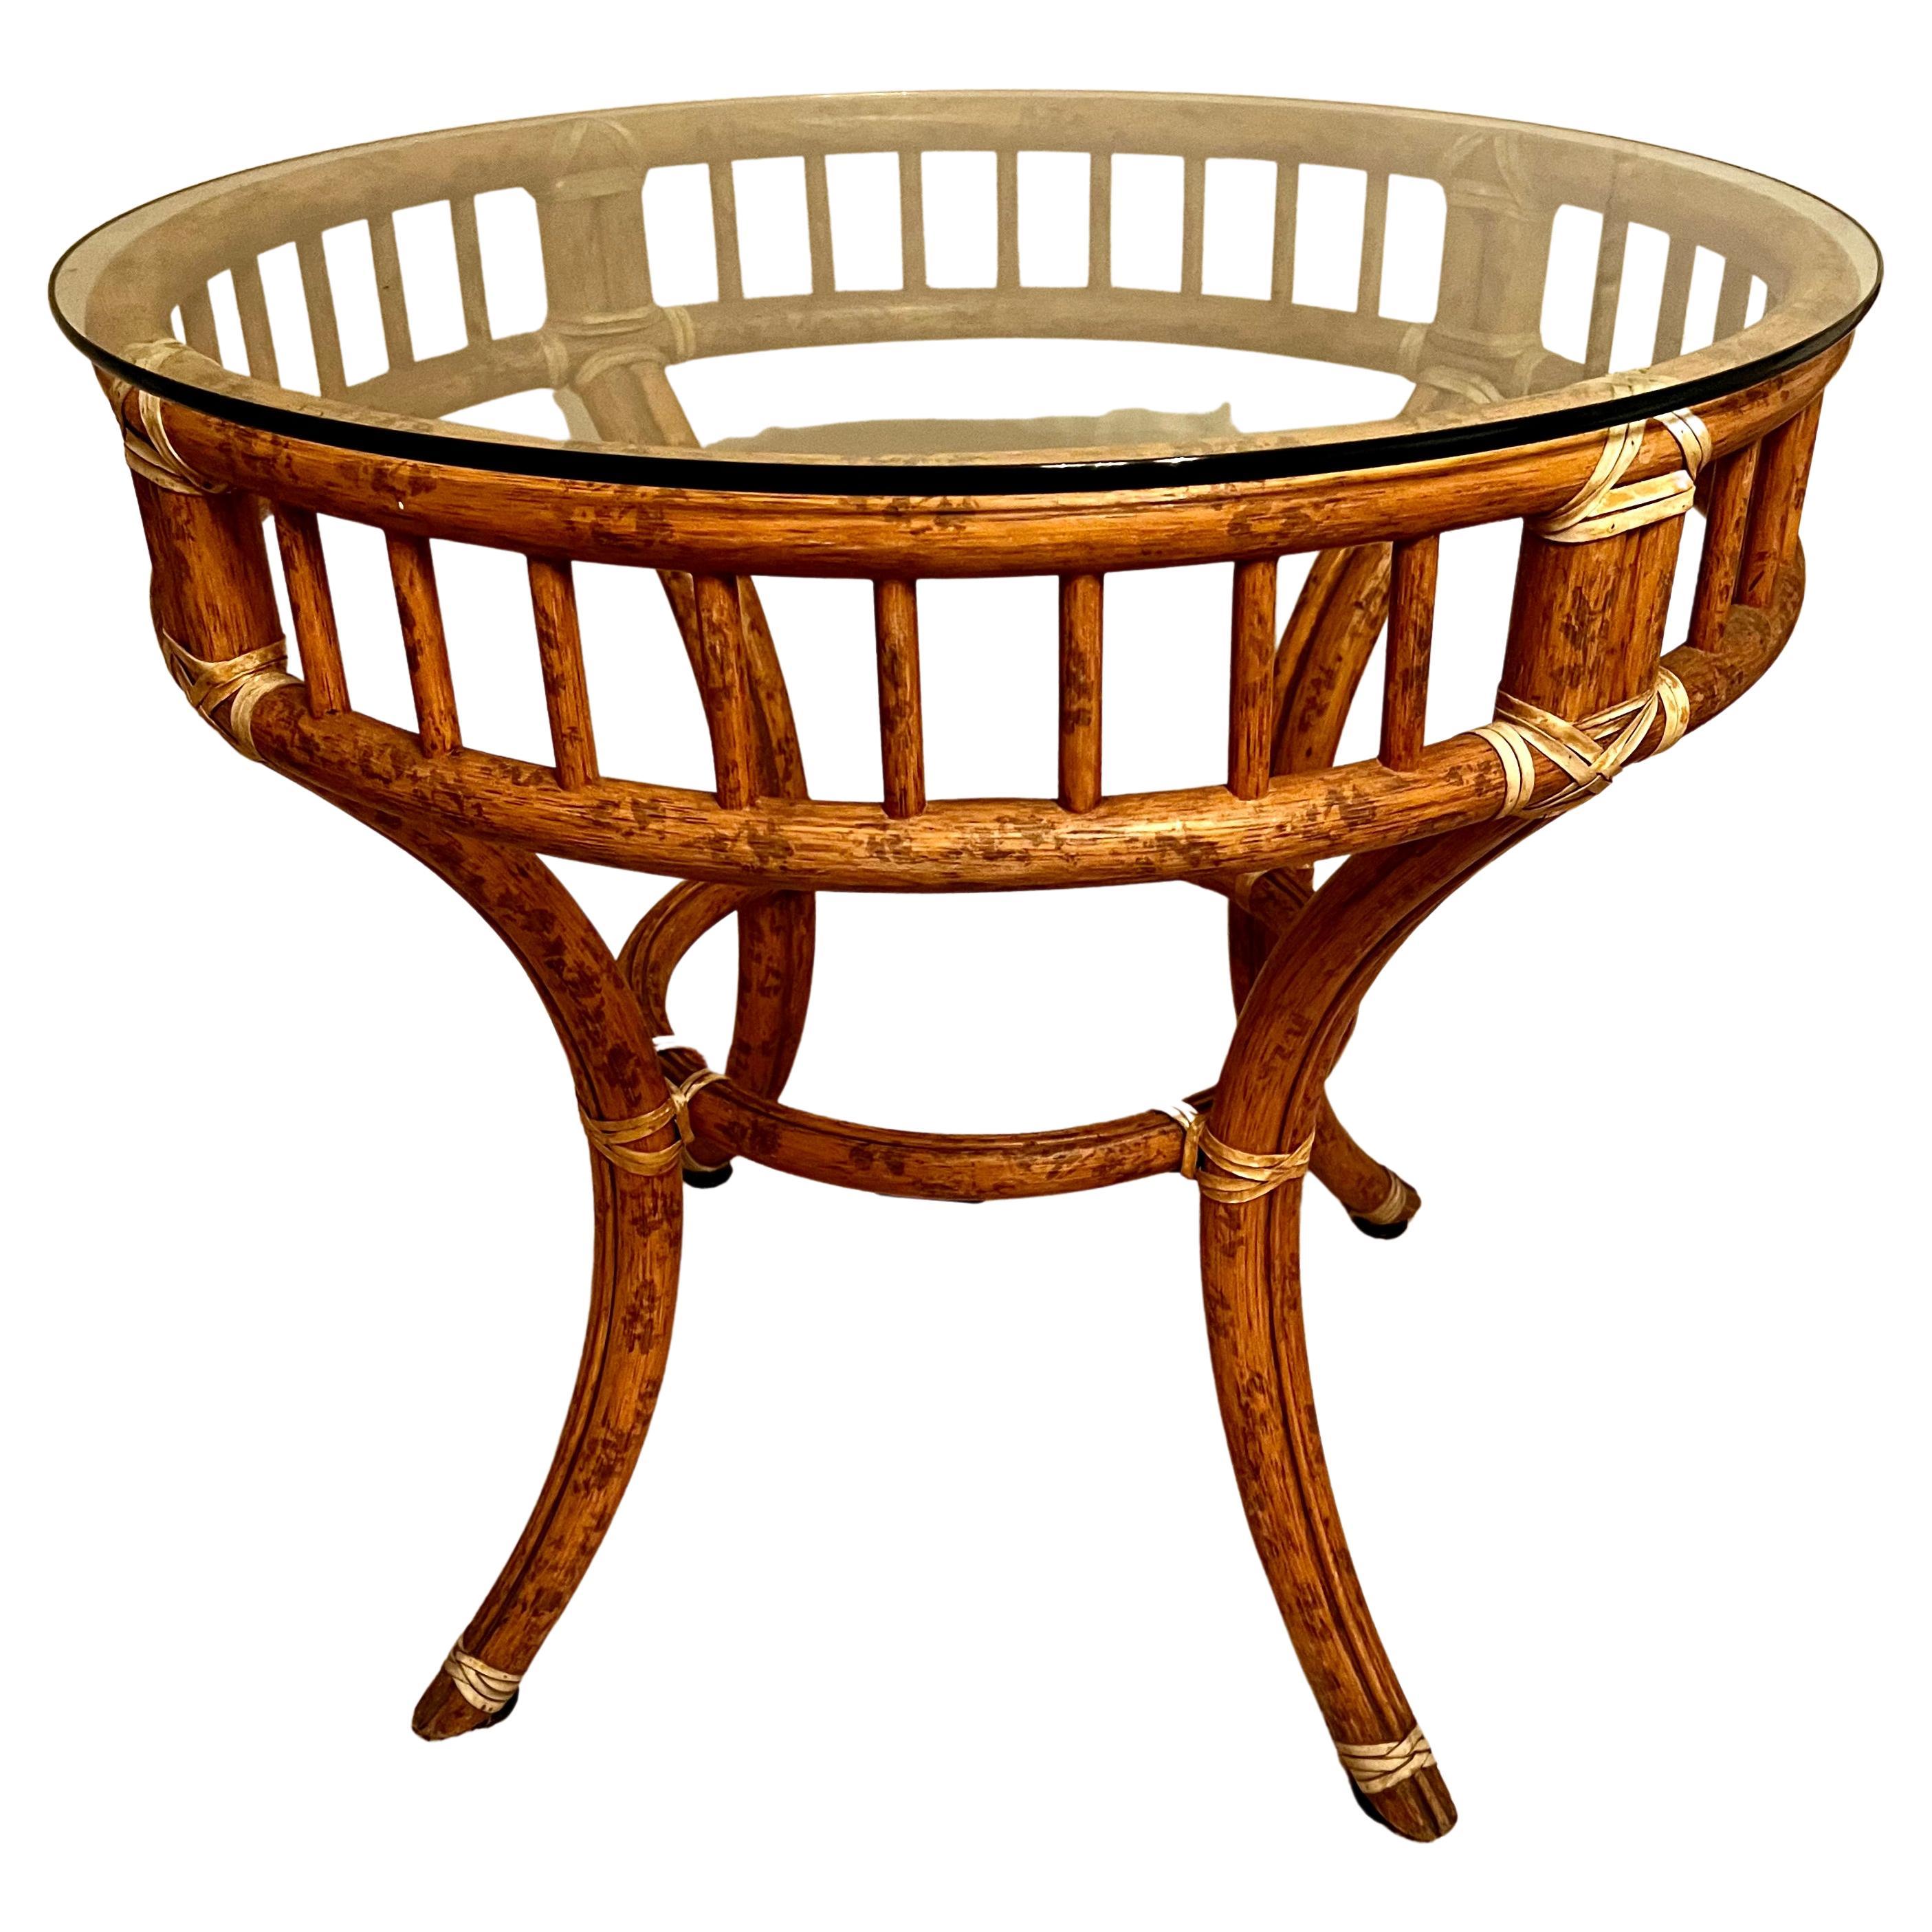 A Thick Rattan or Bamboo table with leather lashing. The round table is a compliment to many spaces and can be used as a side table, Center Table or, with a larger piece of glass, is easily a dining table for four to 8 people.

Signed by iconic